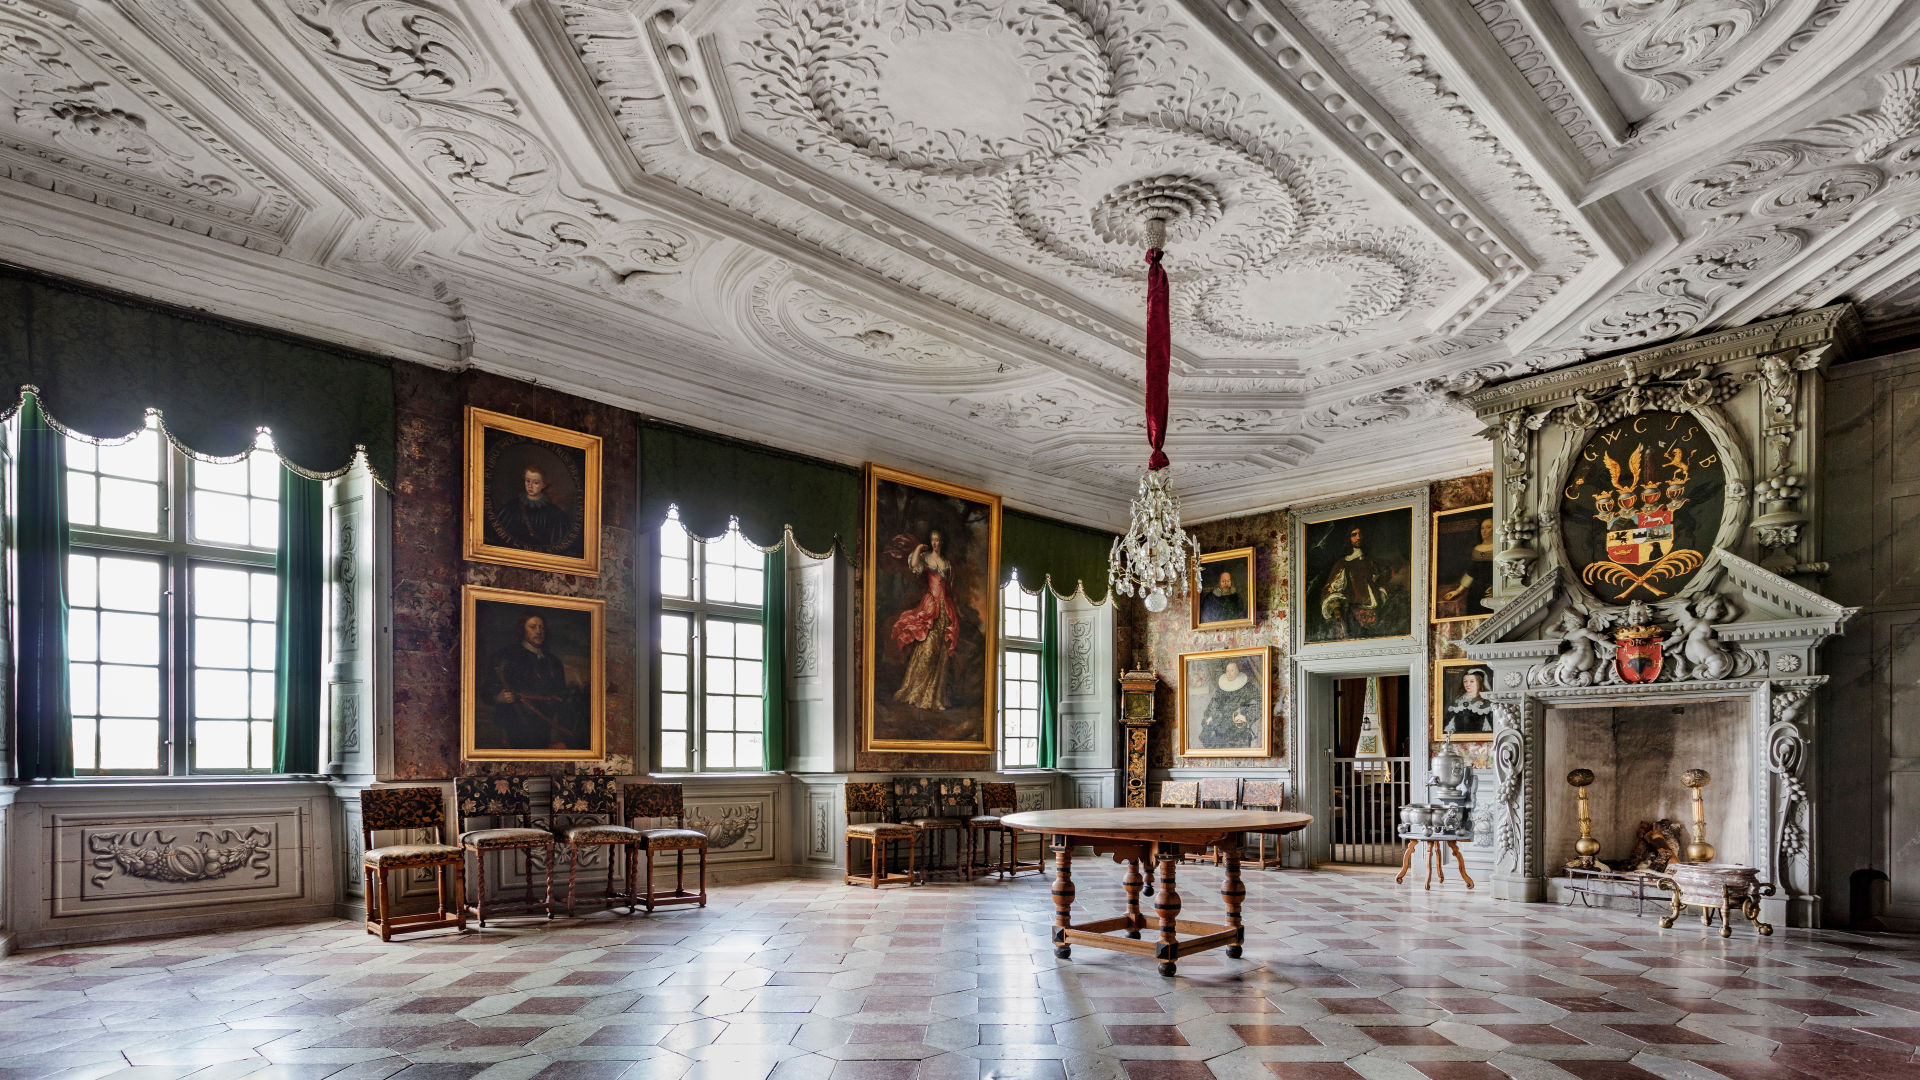  Great hall in the castle containing a fireplace with a coat of arms, oil paintings on the walls, table and chairs.